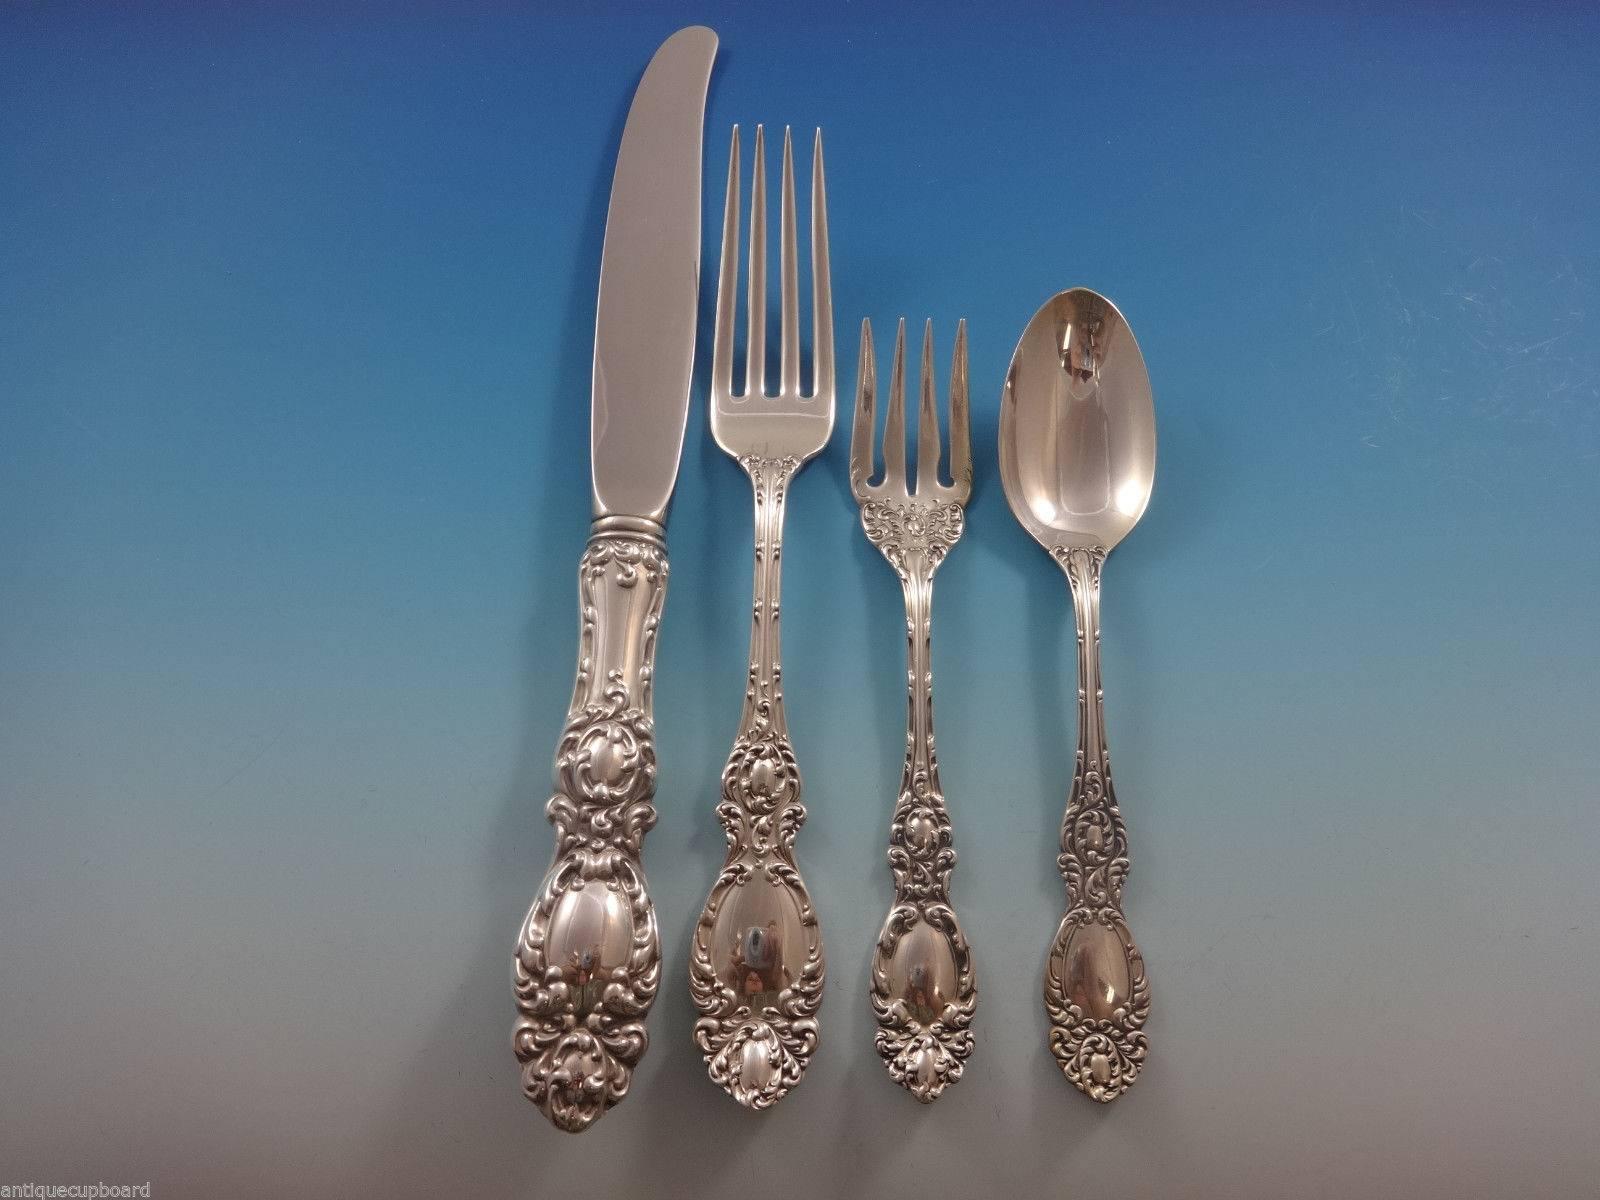 Lucerne by Wallace sterling silver dinner and luncheon size flatware set of 64 pieces. This set includes:

Eight dinner size knives, 9 3/4